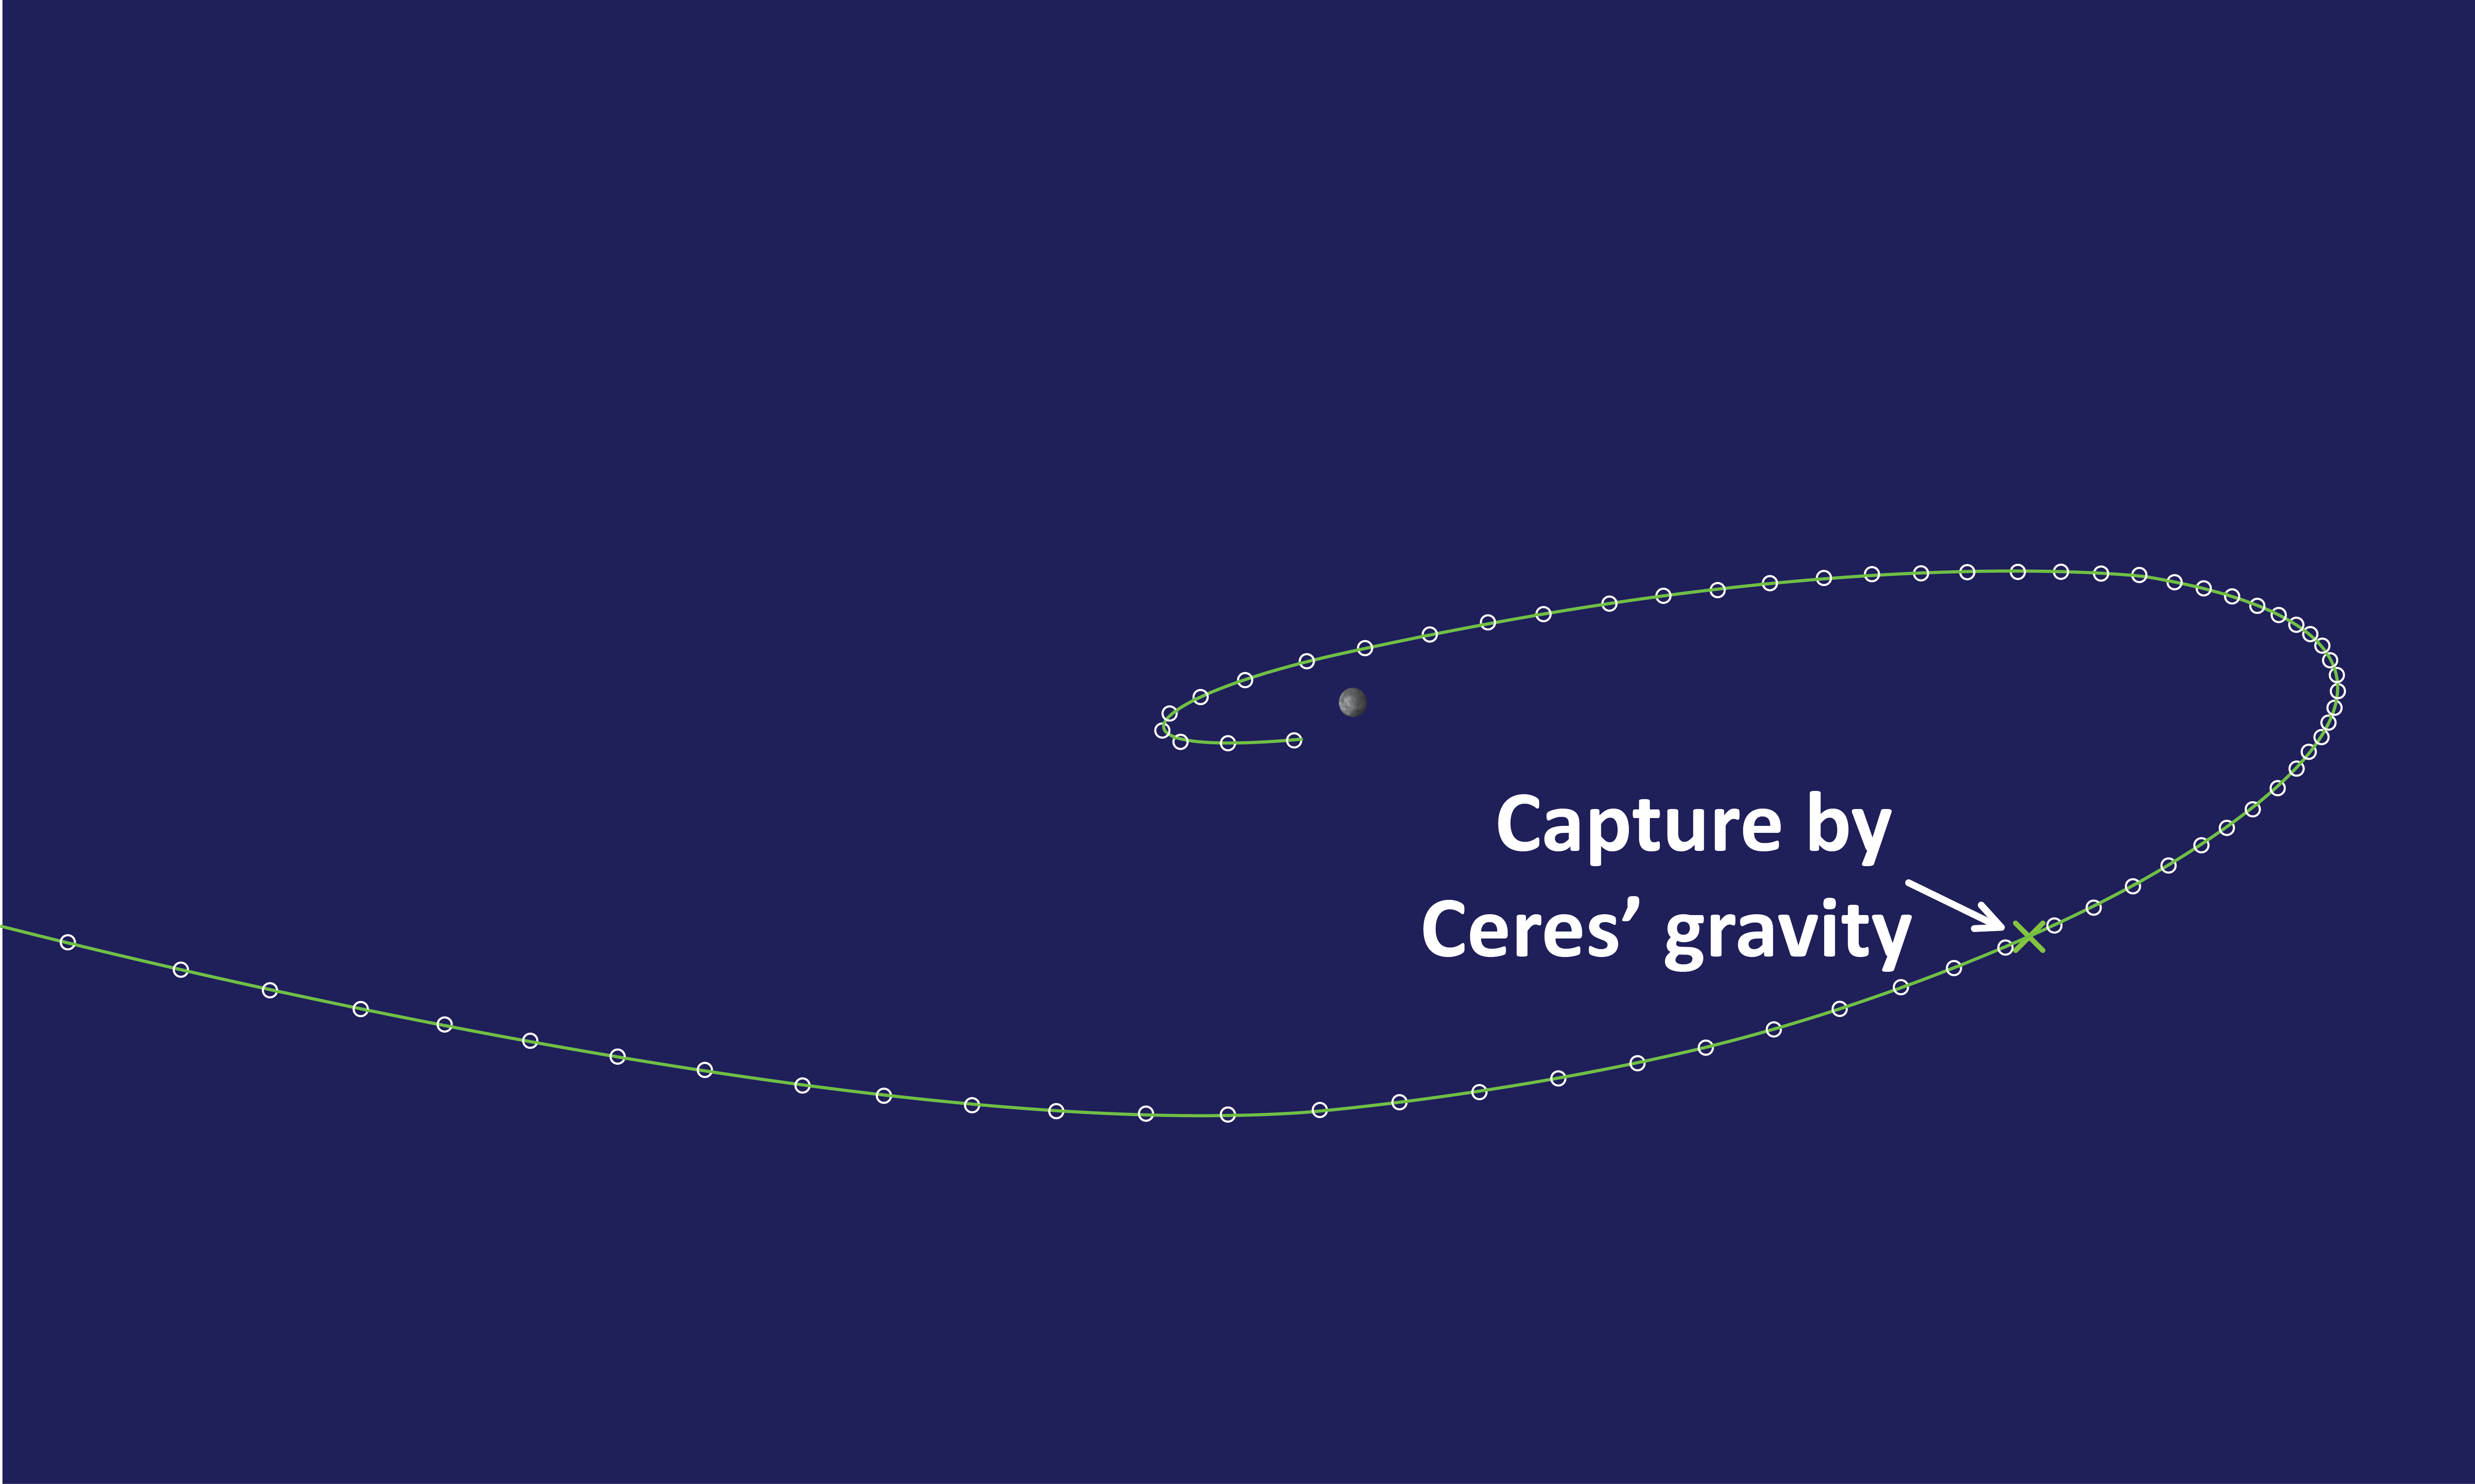 Dawn’s approach trajectory. We are looking down on the north pole of Ceres. The sun is off the figure far to the left. The spacecraft flies in from the left and then is captured on the way to the apex of its orbit. It gets closer to Ceres during the first part of its approach but then recedes for a while before coming in still closer at the end. Lighting by the sun is not depicted here, but when Dawn is on the right side of the figure, it only sees a crescent of Ceres, which is illuminated from the left. (The white circles are at one-day intervals.) Credit: NASA/JPL